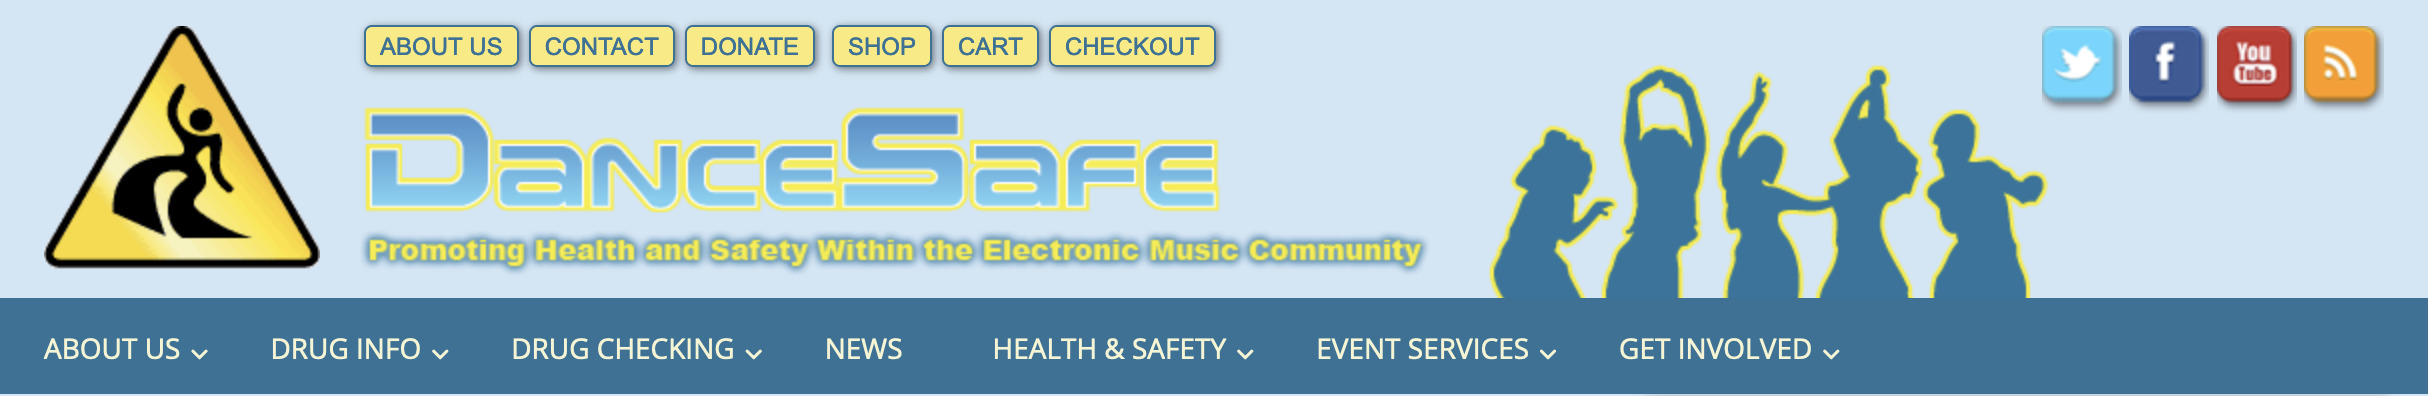 DanceSafe's old blue website header with cheesy graphics, from 2013.